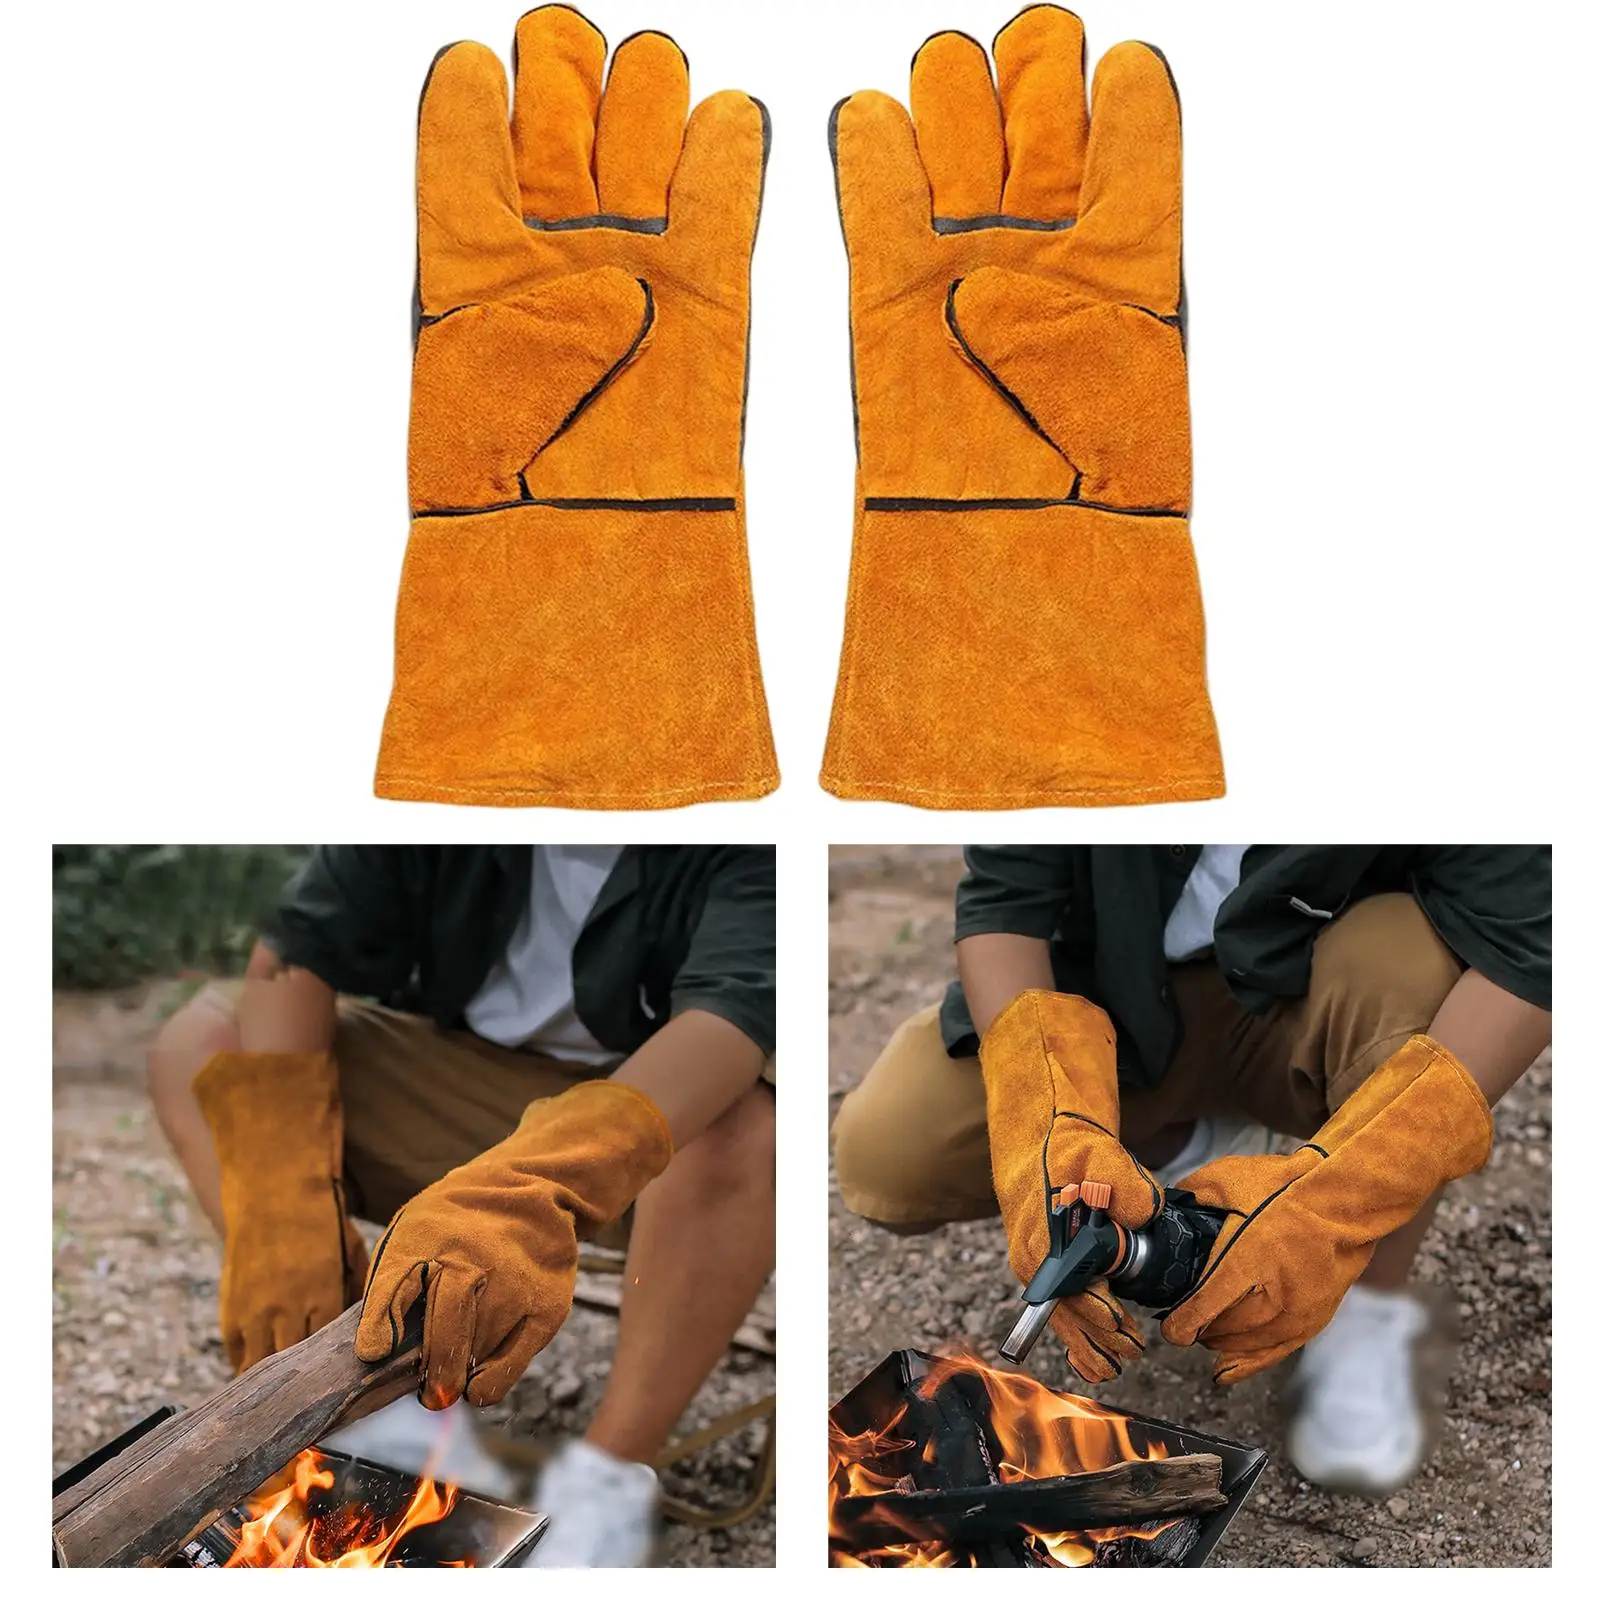 2 Pieces Heat Resistant Heat Resistant Gloves PU Leather Anti Slip BBQ Mitts Oven Gloves Grill Gloves for Heatproof Camping